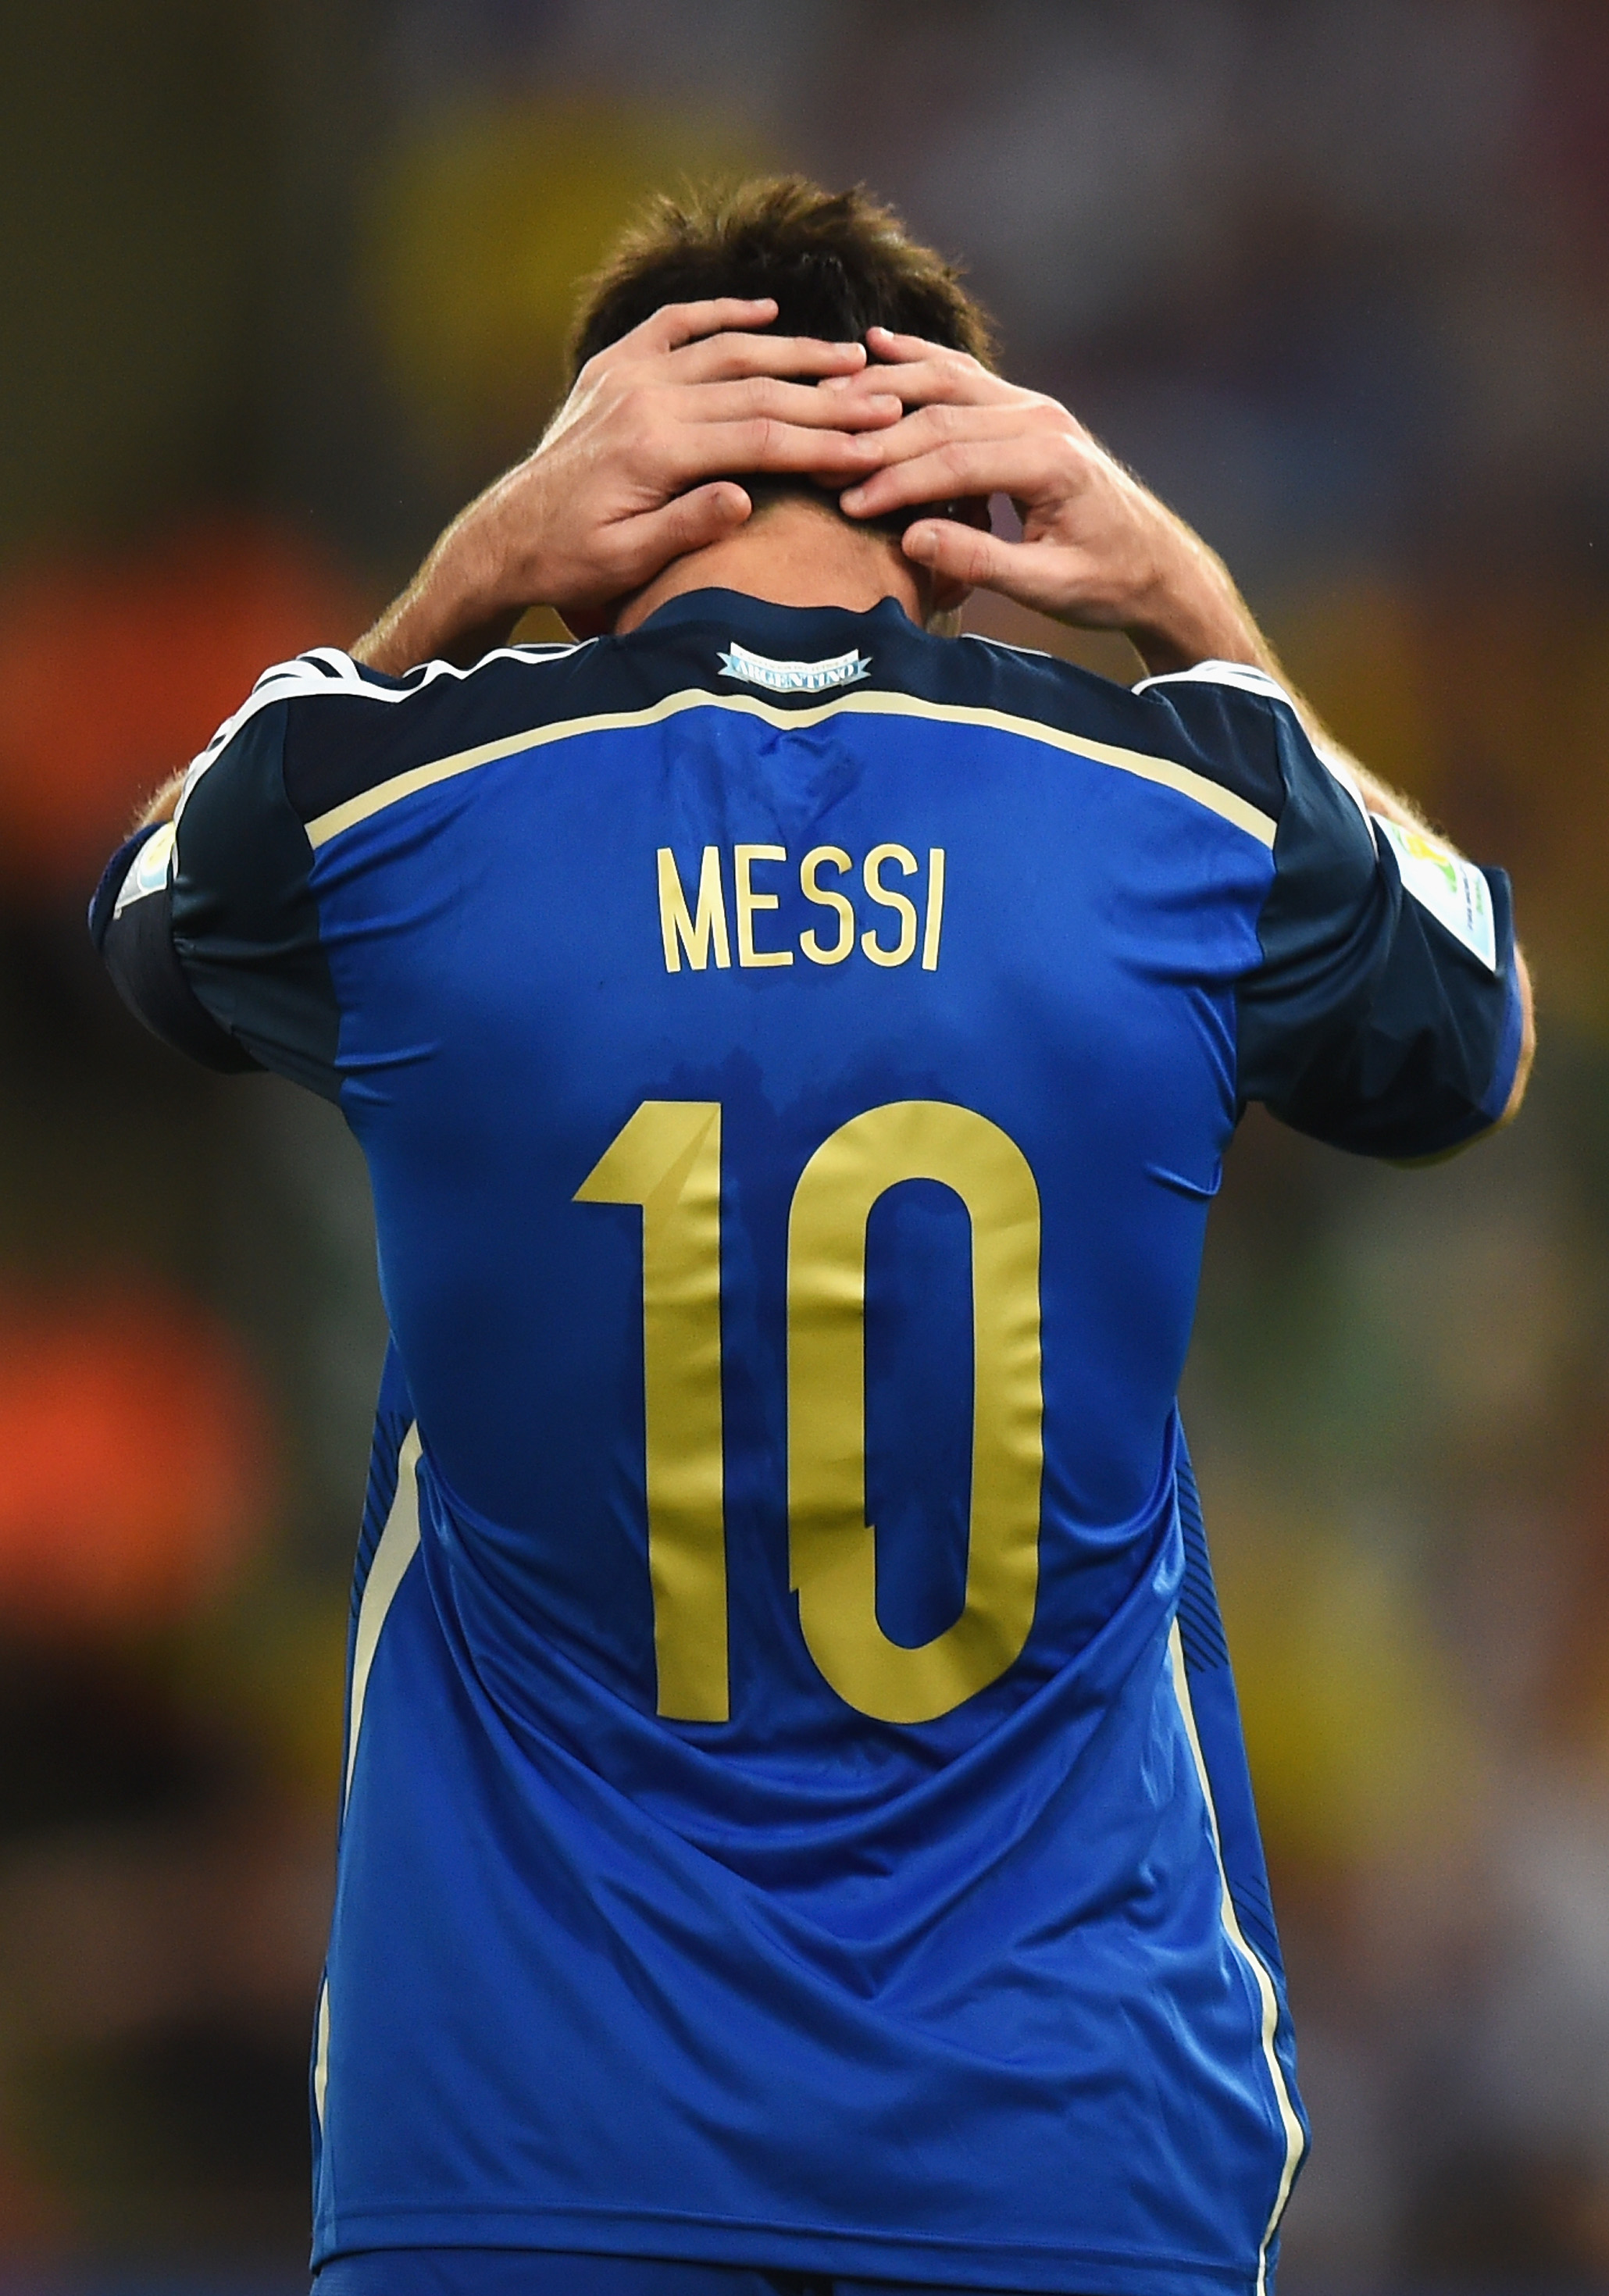 Lionel Messi of Argentina reacts during the 2014 FIFA World Cup match against Germany on July 13 in Rio de Janeiro, Brazil. (Mike Hewitt - FIFA—Getty Images)